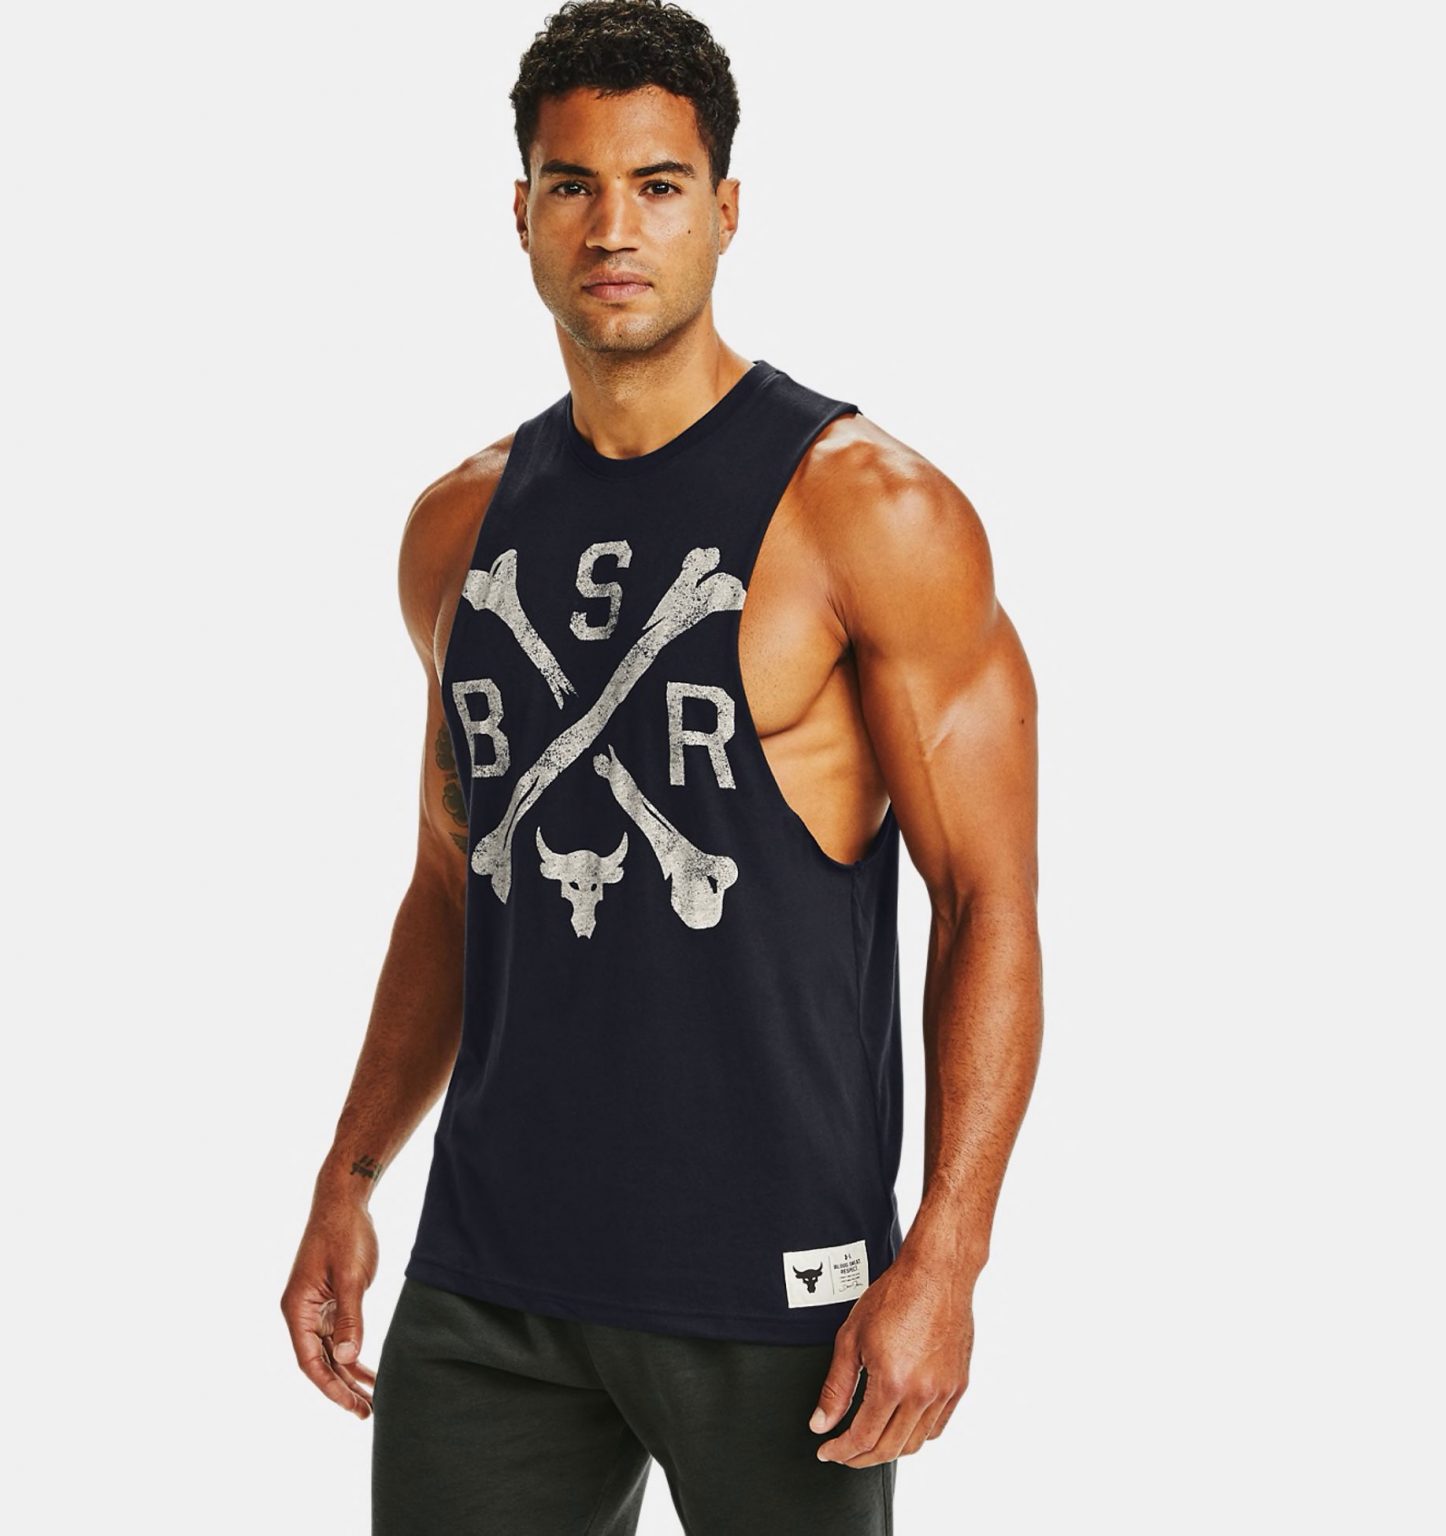 New Project Rock Under Armour Apparel | FighterXFashion.com